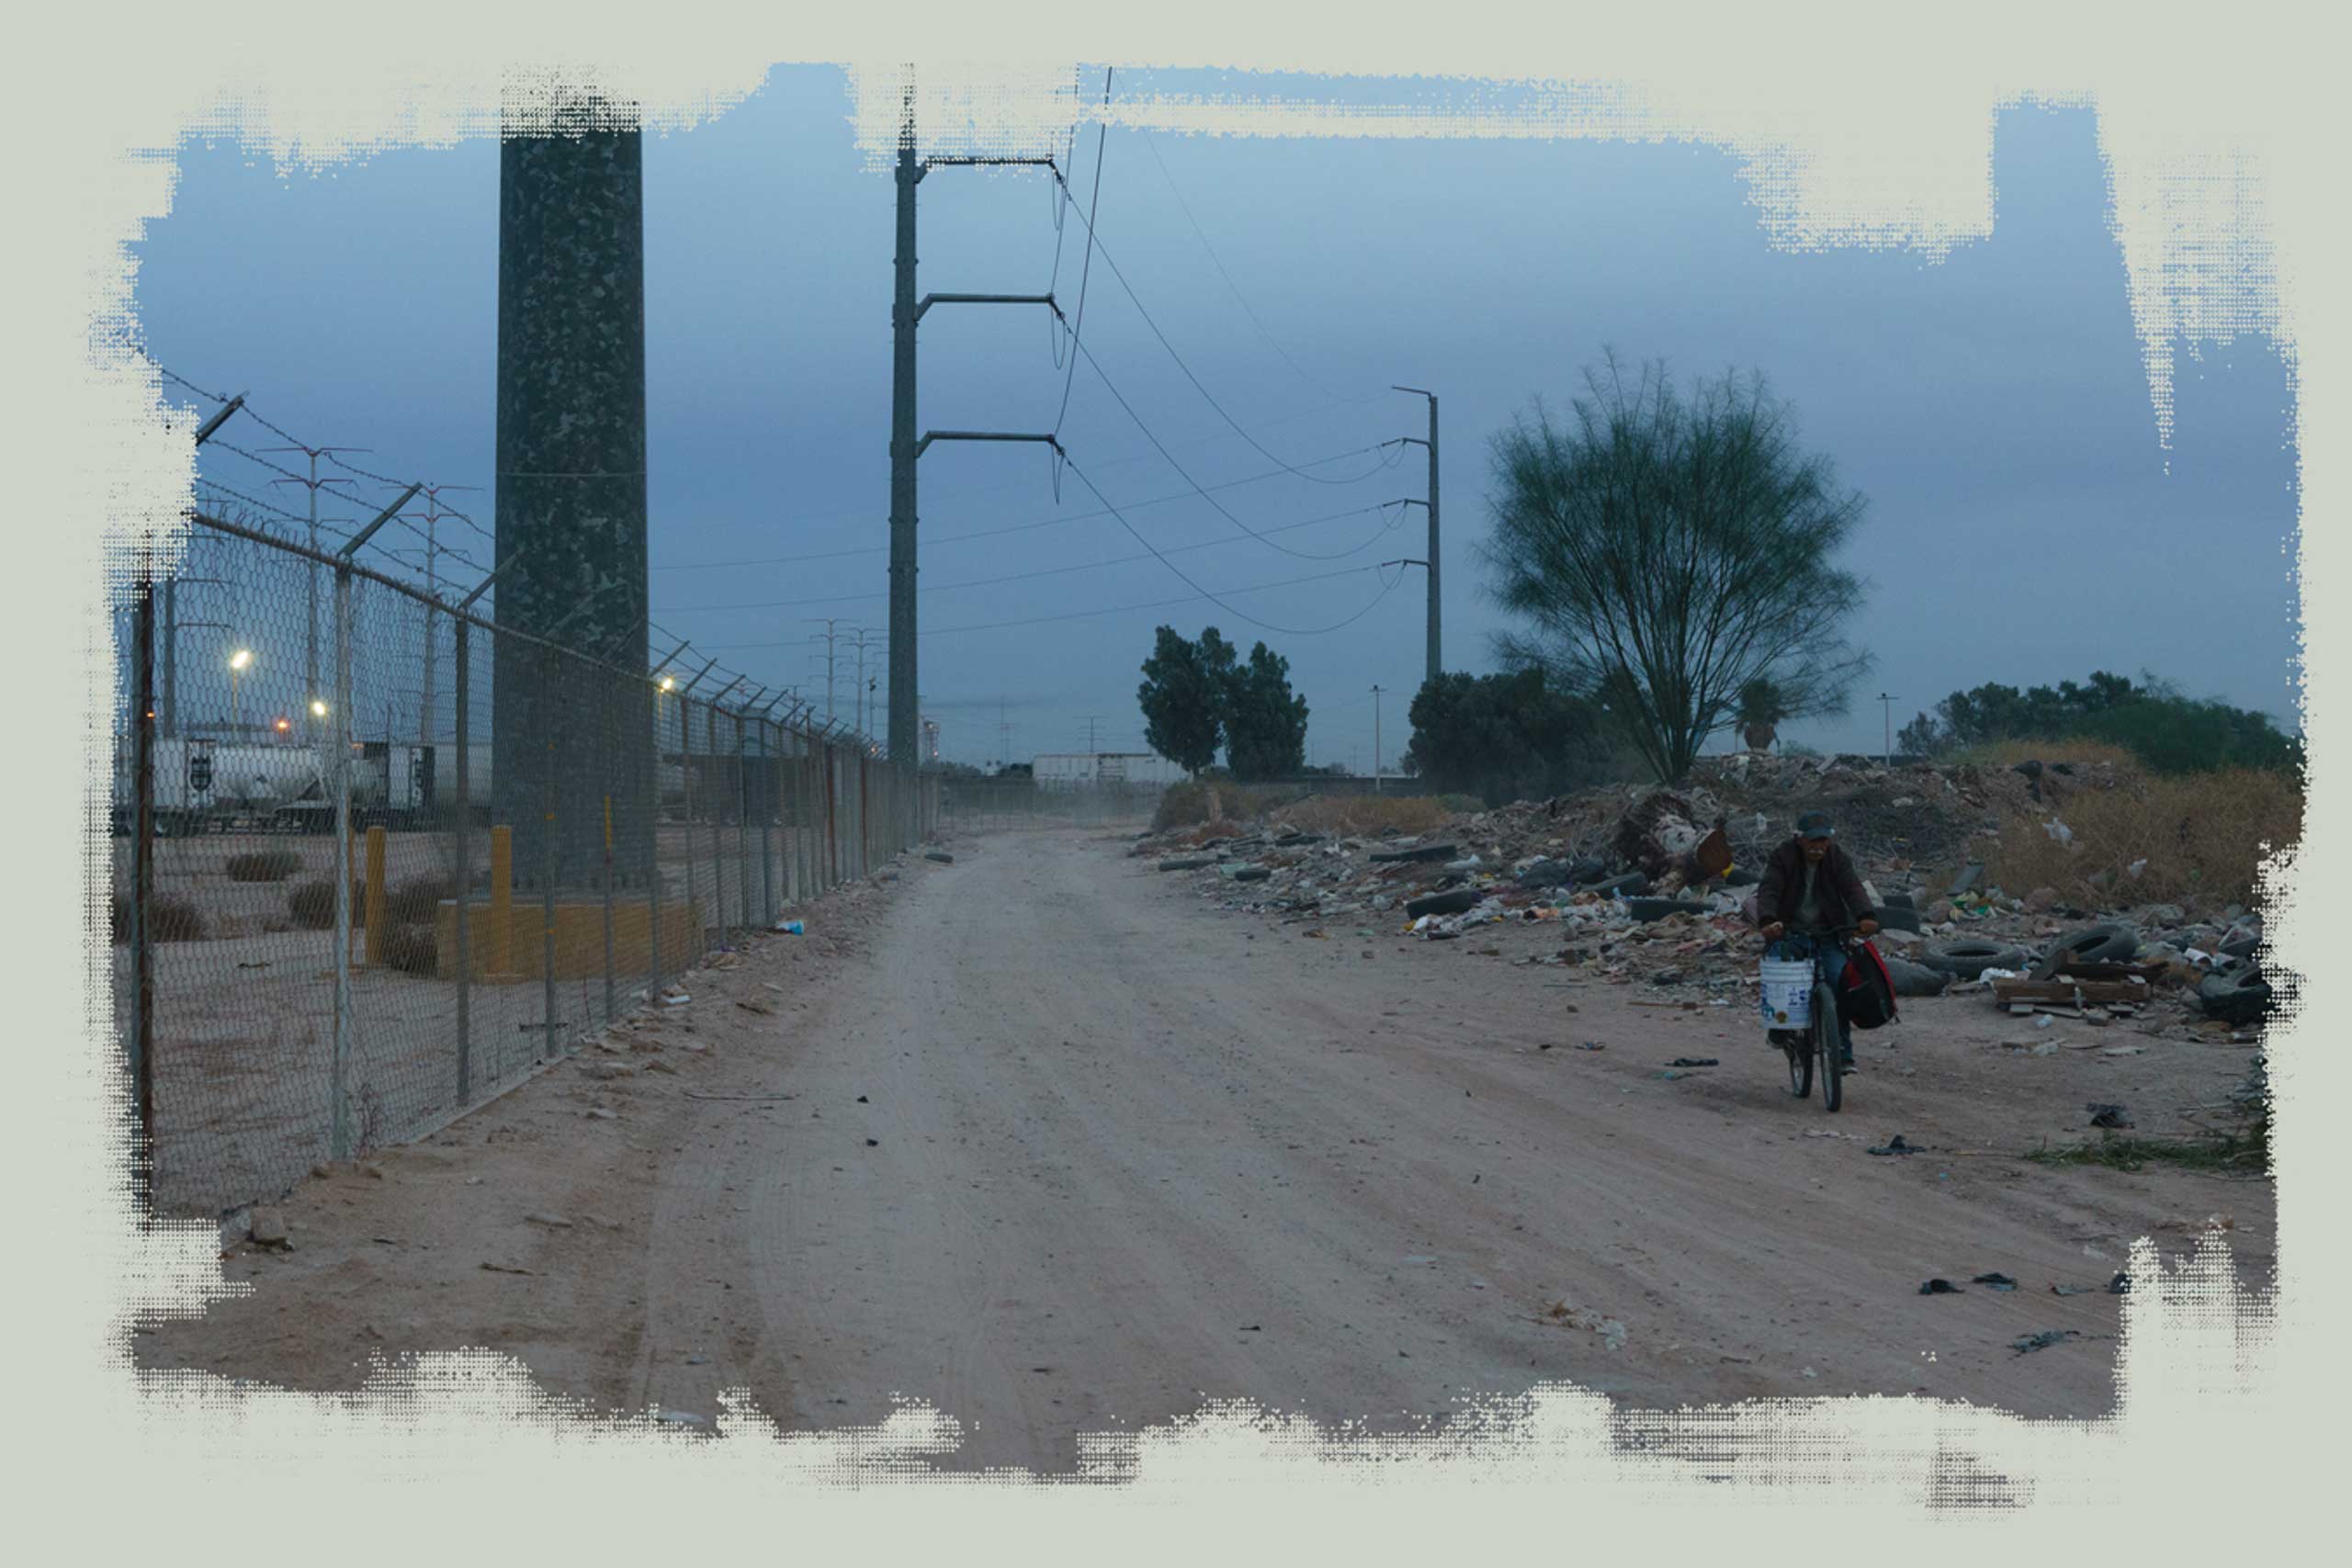 A man rides a bicycle down a road next to a factory in Mexicali.